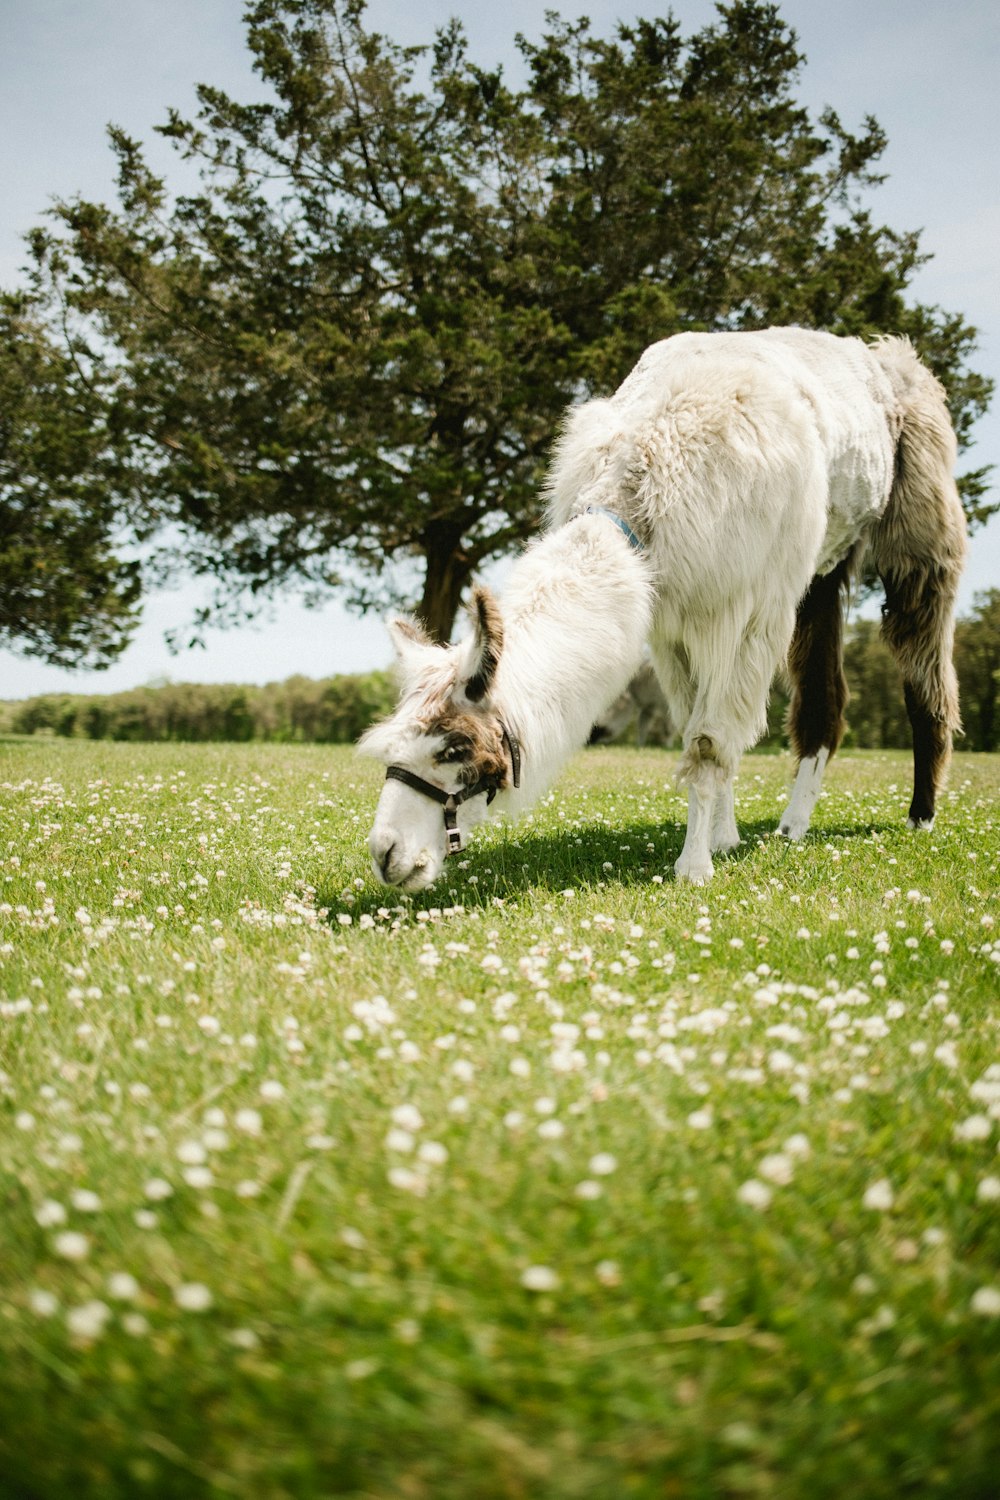 a goat grazing in a field with a tree in the background